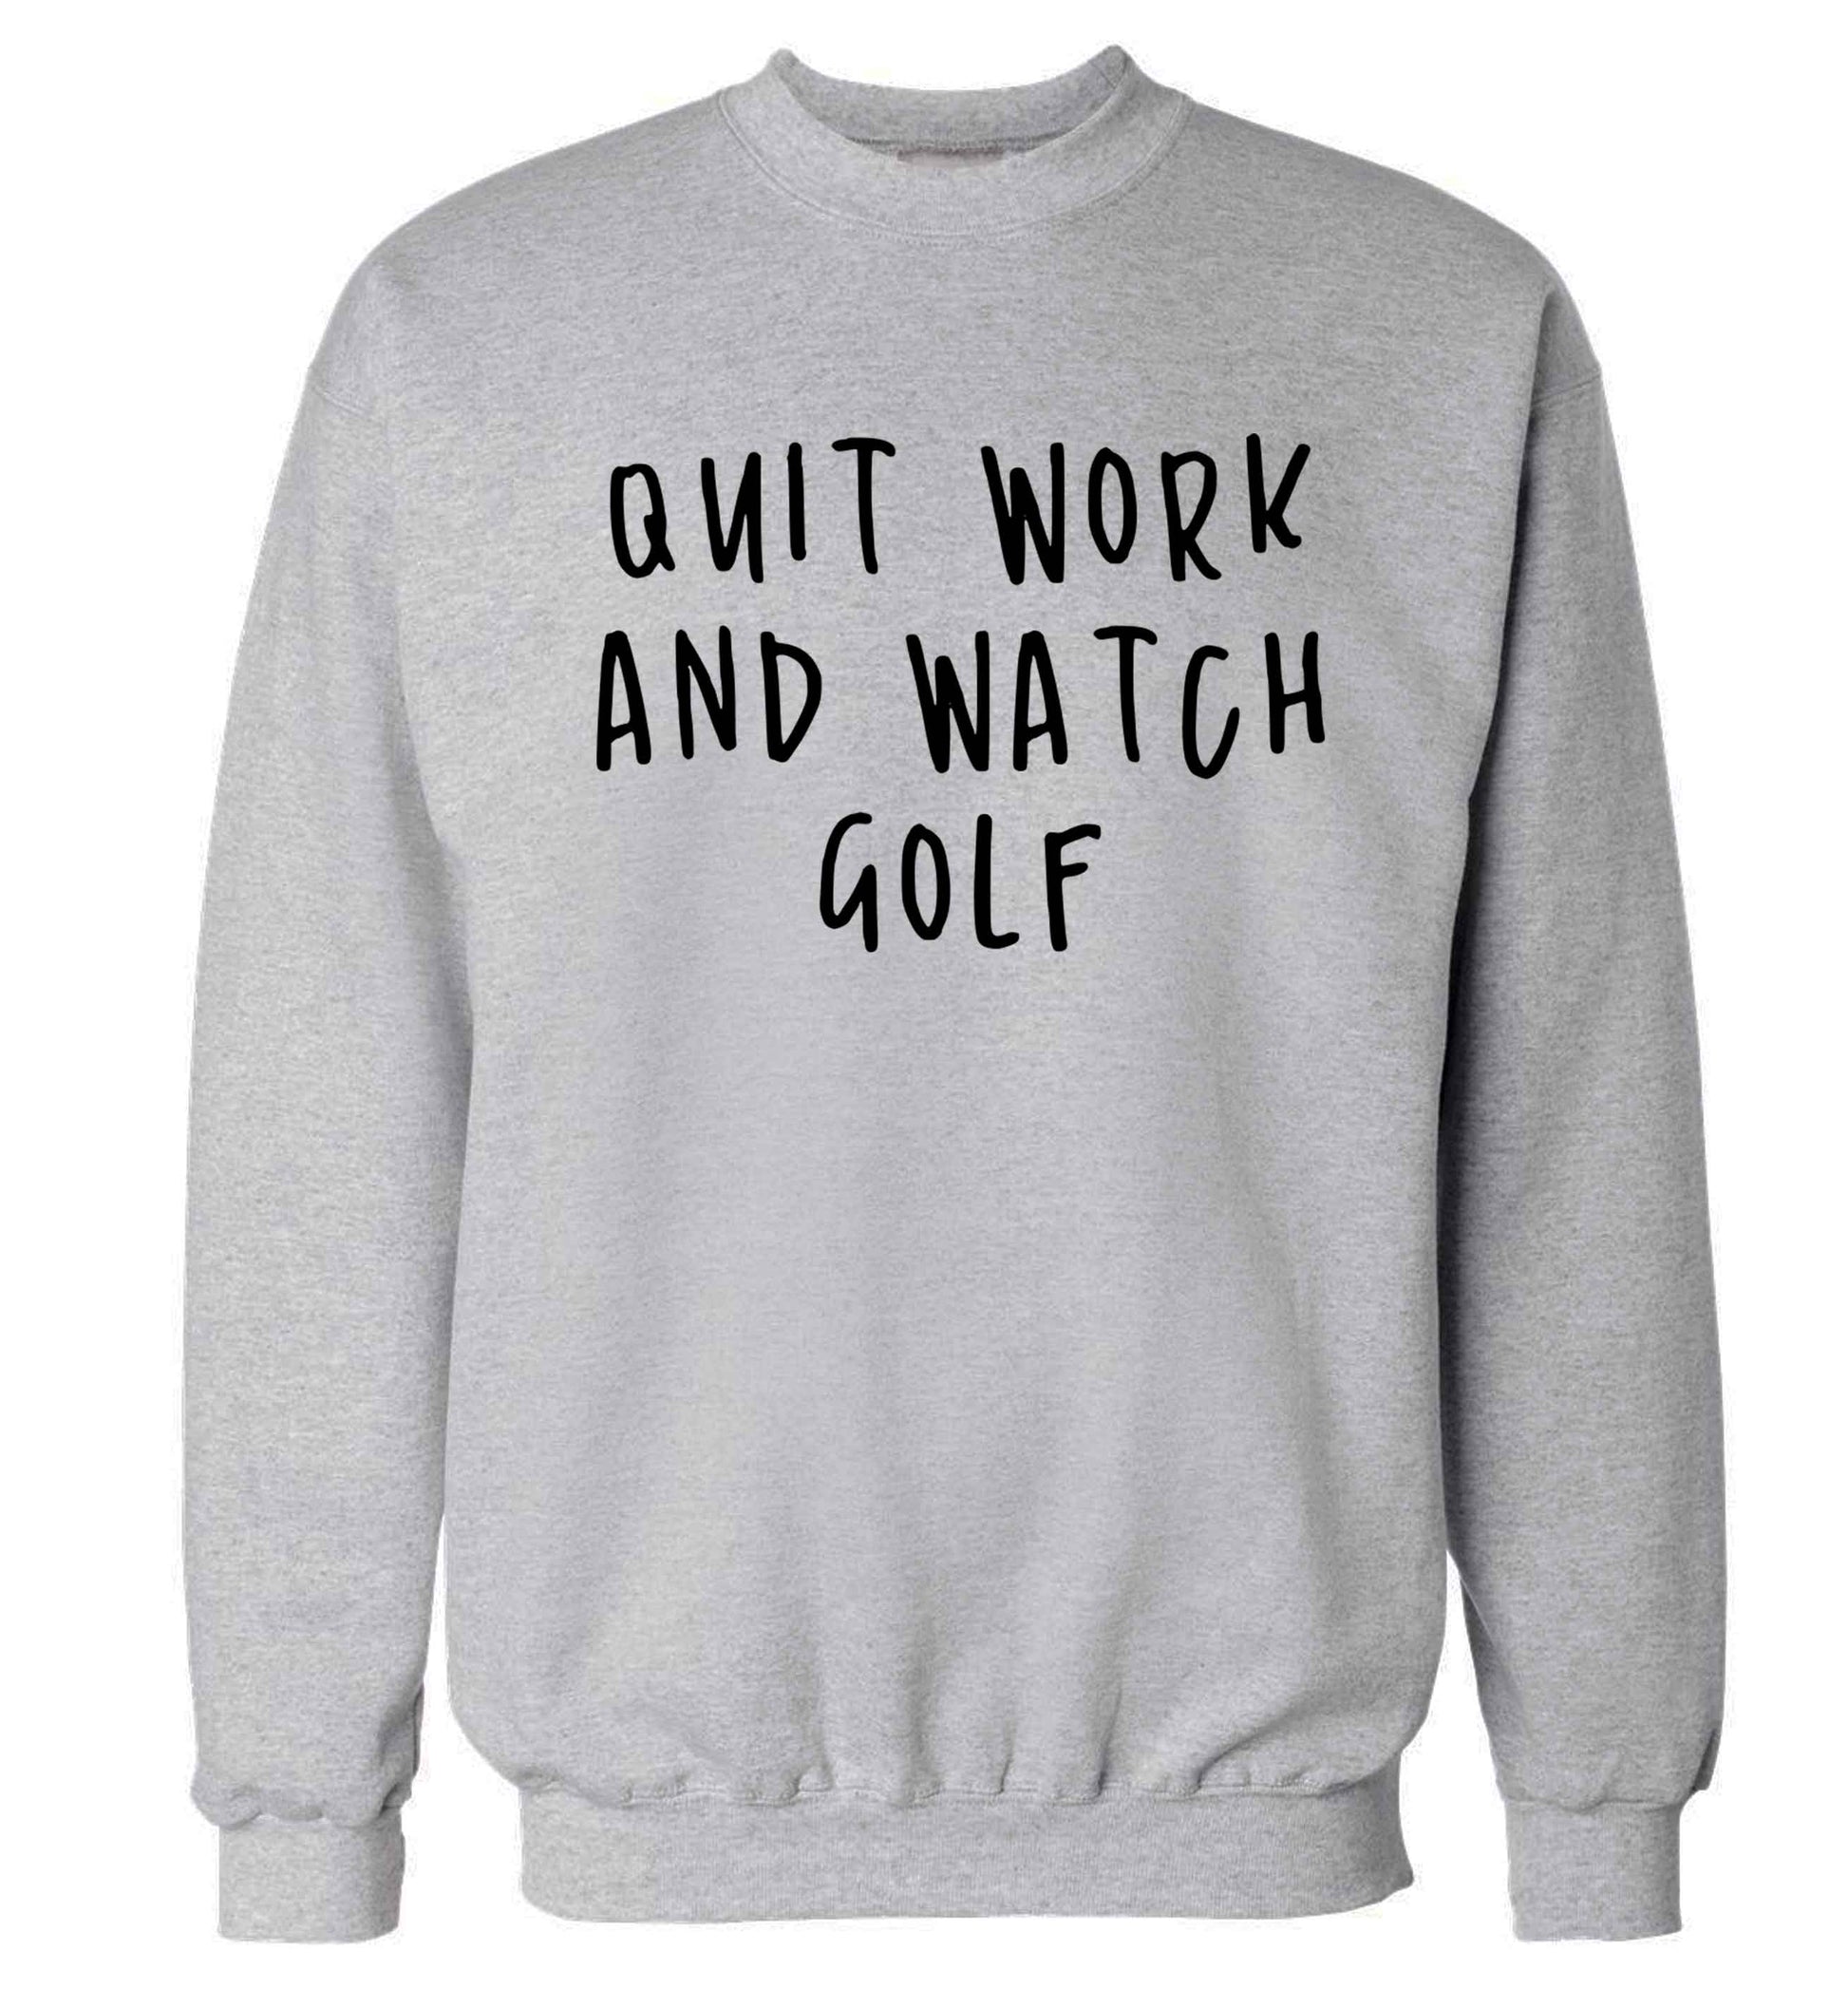 Quit work and watch golf Adult's unisex grey Sweater 2XL